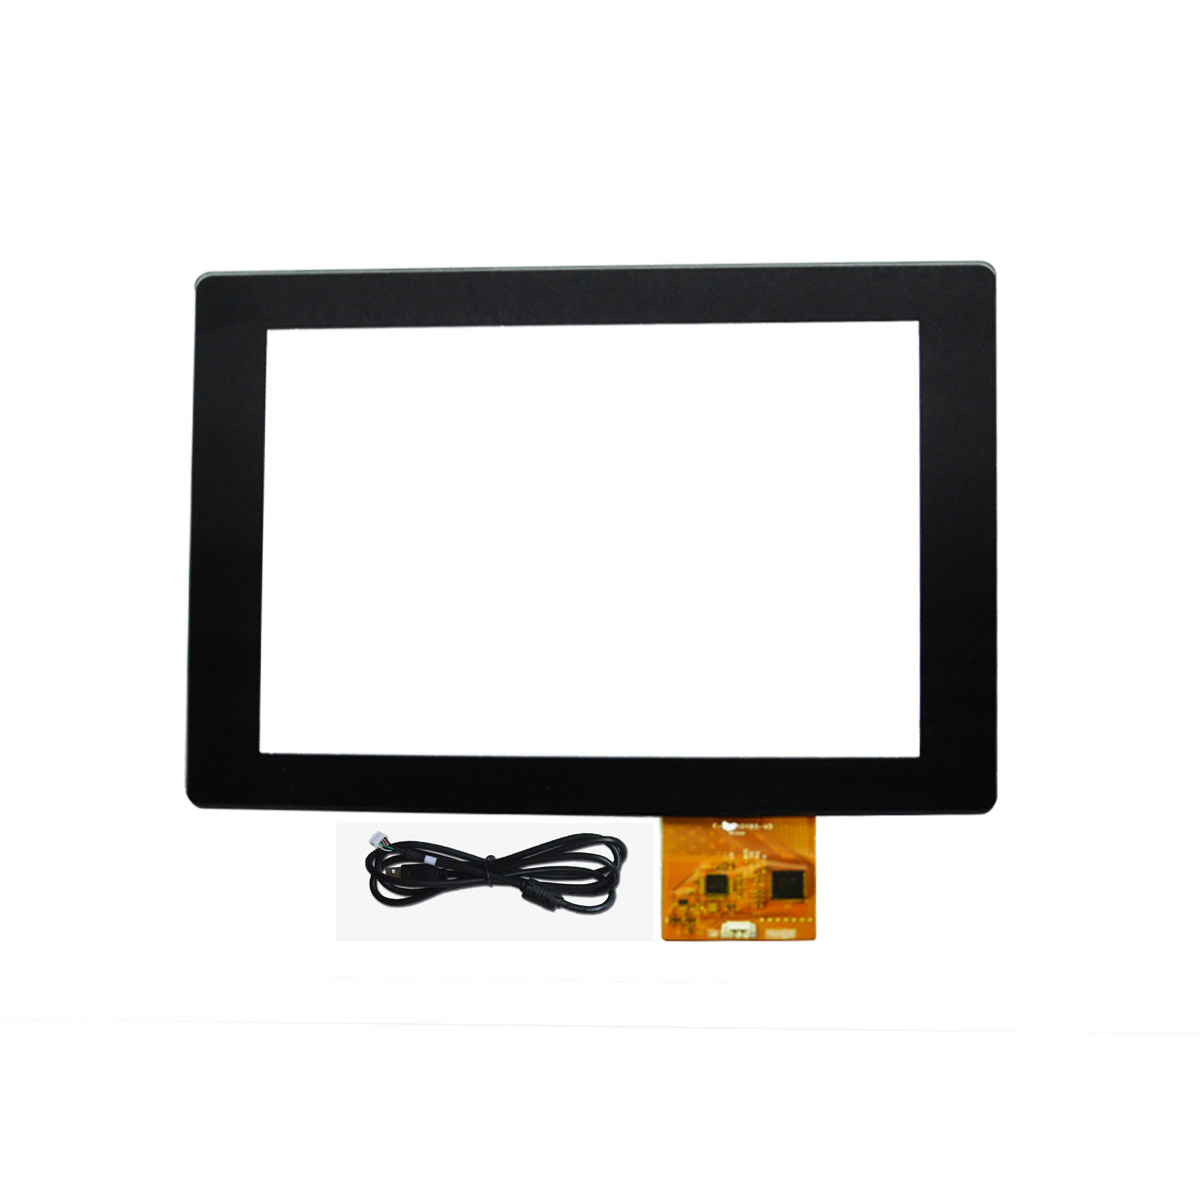 10.1 inch Projected Capacitive touch screens PCAP/PCT EETI/ilitek Controller